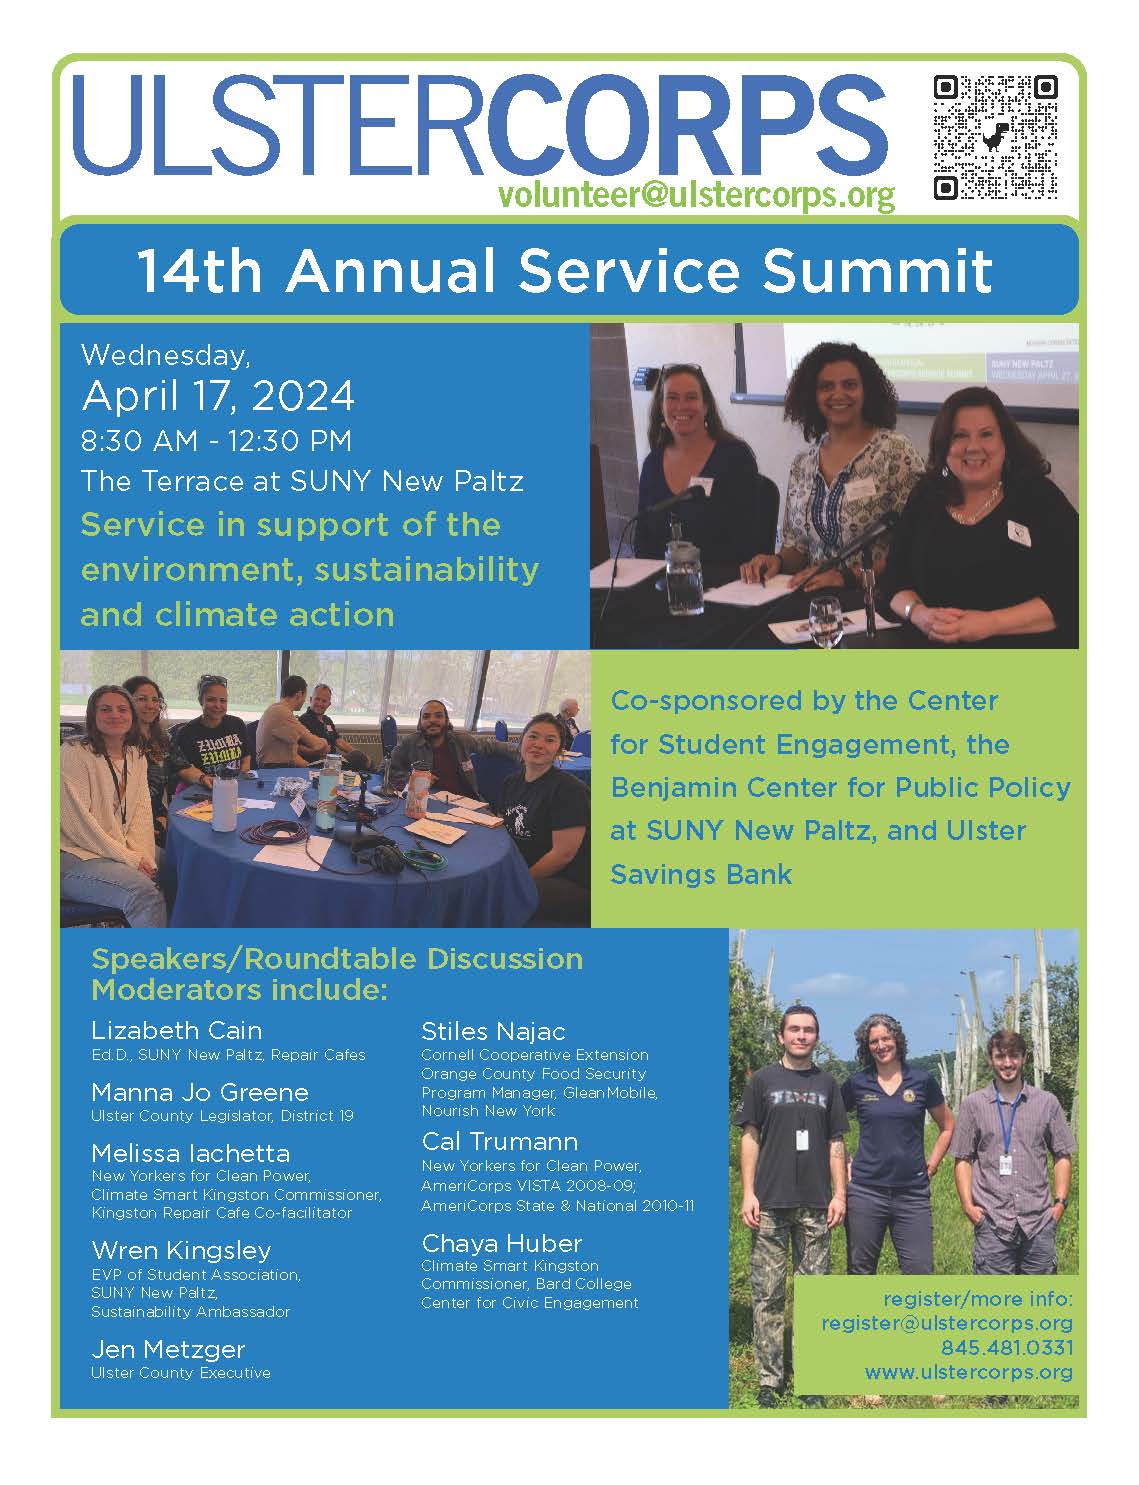 14th Annual UlsterCorps Service Summit